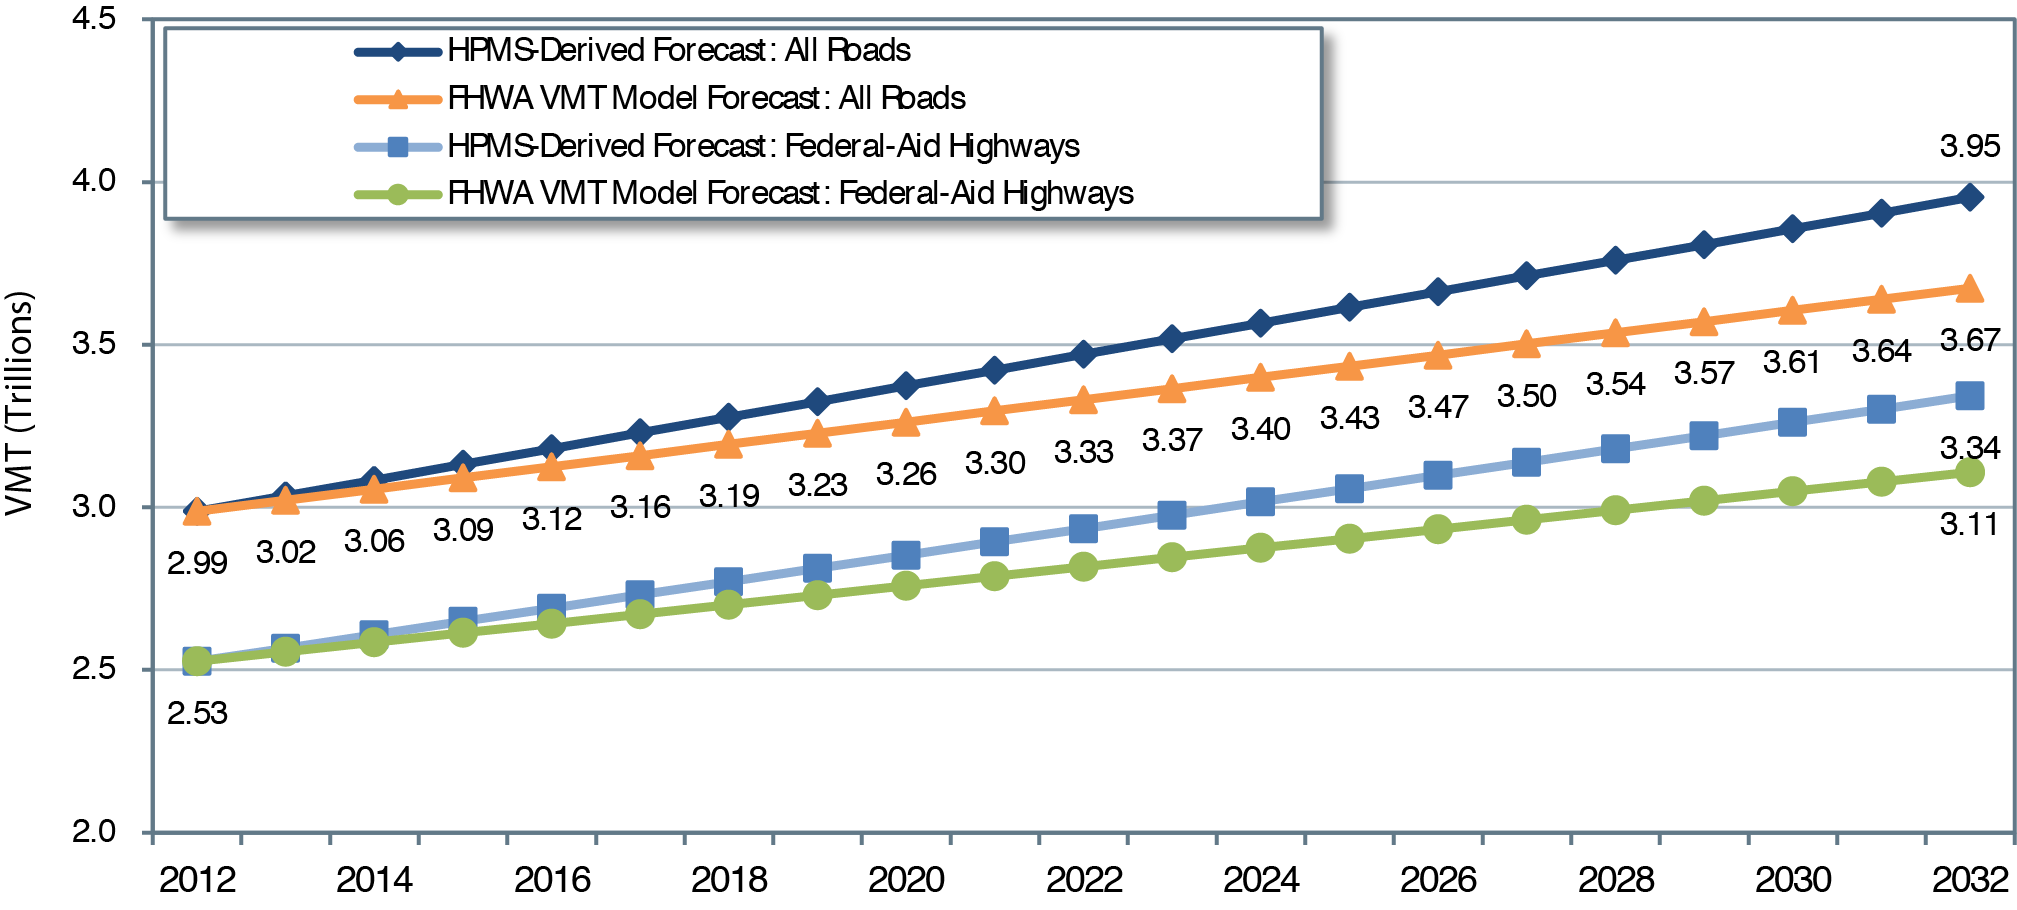 A line graph plots values for trillions of vehicle miles traveled over the time period 2012 to 2032 for projected highway VMT based on HPMS-derived forecasts or FHWA VMT forecast model. For the HPMS-derived forecast (all roads), the growth trend has an initial value of 2.99 trillion VMT in the year 2012 and climbs upward steadily to end at a value of 3.95 trillion VMT in the year 2032. The data set for the FHWA VMT forecast model (all roads) also has an initial value of 2.99 trillion VMT in the year 2012 and climbs upward more gradually to end at a value of 3.67 trillion VMT in the year 2032.  For the HPMS-derived forecast (Federal-aid highways), the growth trend has an initial value of 2.53 trillion VMT in the year 2012 and climbs upward steadily to end at a value of 3.34 trillion VMT in the year 2032. The data set for the FHWA VMT forecast model (Federal-aid highways) also has an initial value of 2.53 trillion VMT in the year 2012 and climbs upward more gradually to end at a value of 3.11 trillion VMT in the year 2032.  <em>Sources: Highway Performance Monitoring System; FHWA Forecasts of Vehicle Miles Traveled (VMT), May 2015.